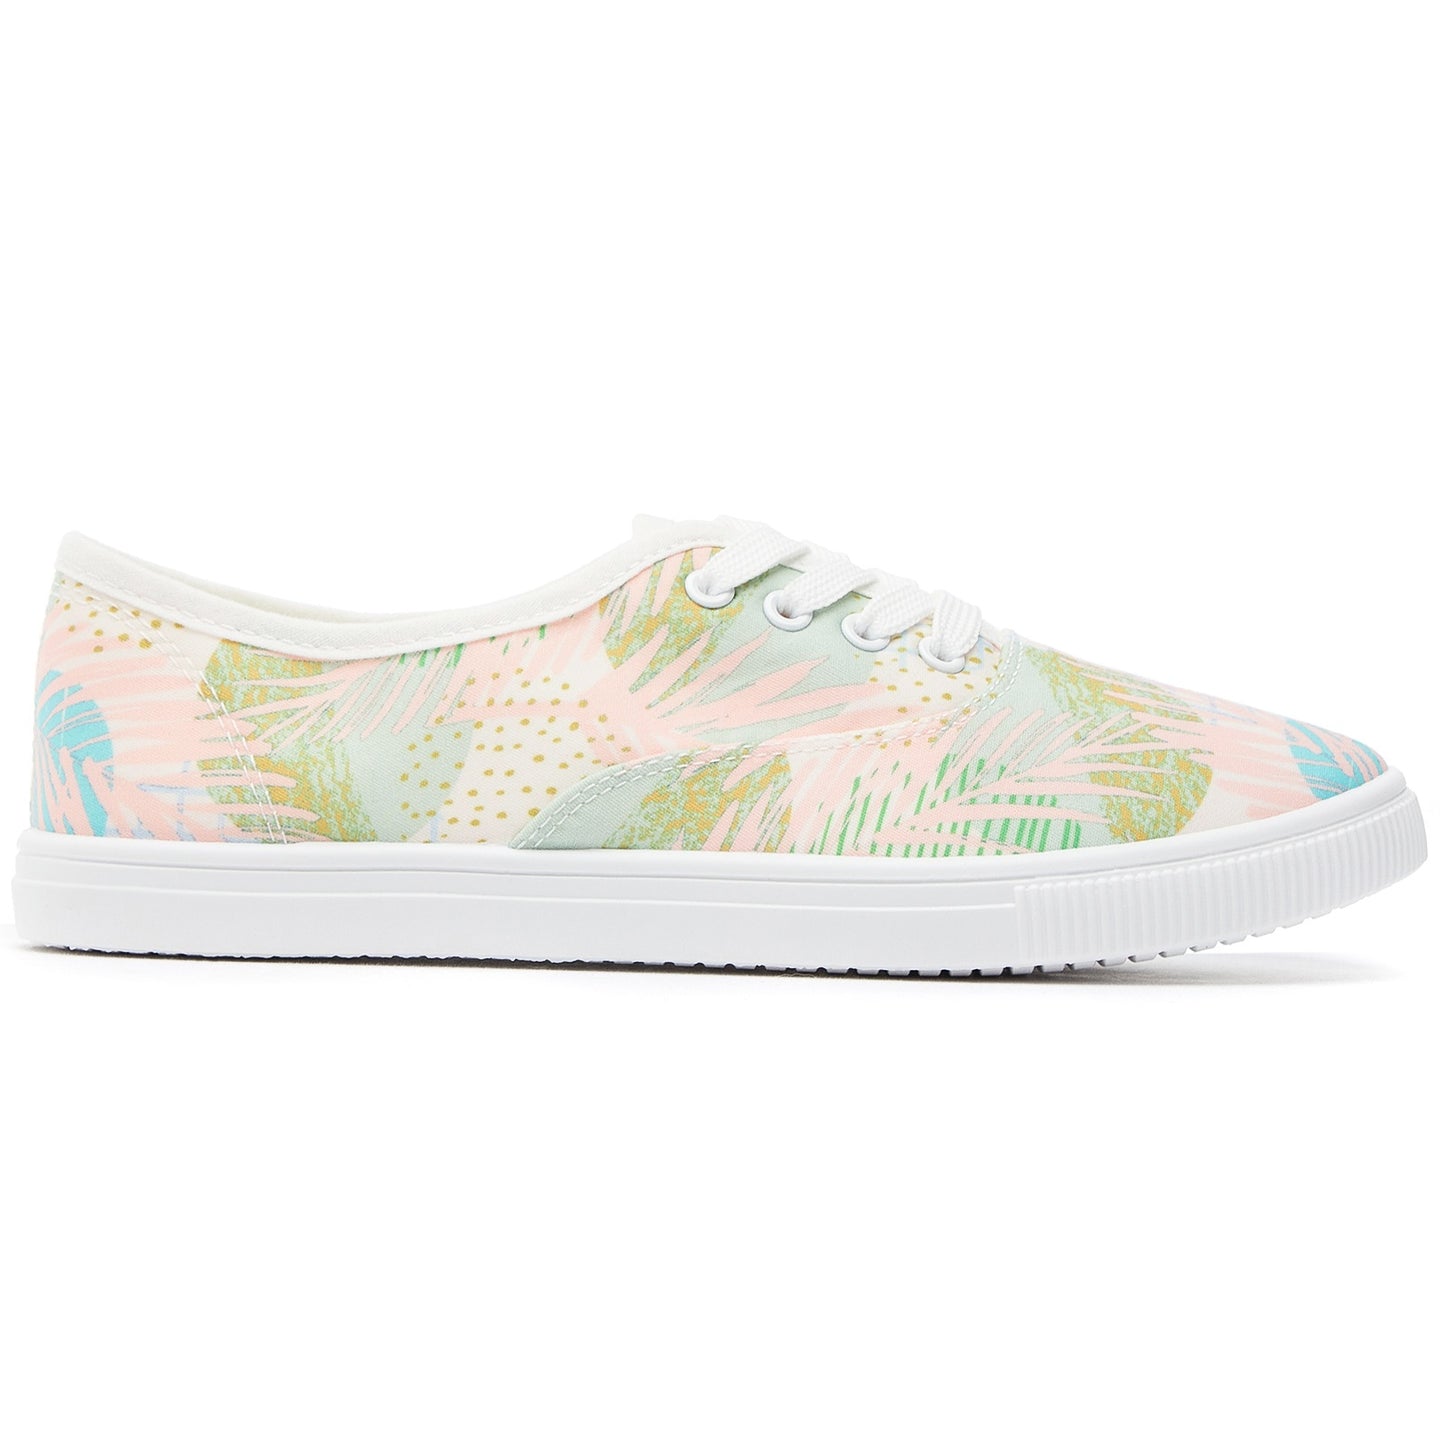 SOBEYO Women's Sneakers Canvas Lace Up Low Top Pink Flora